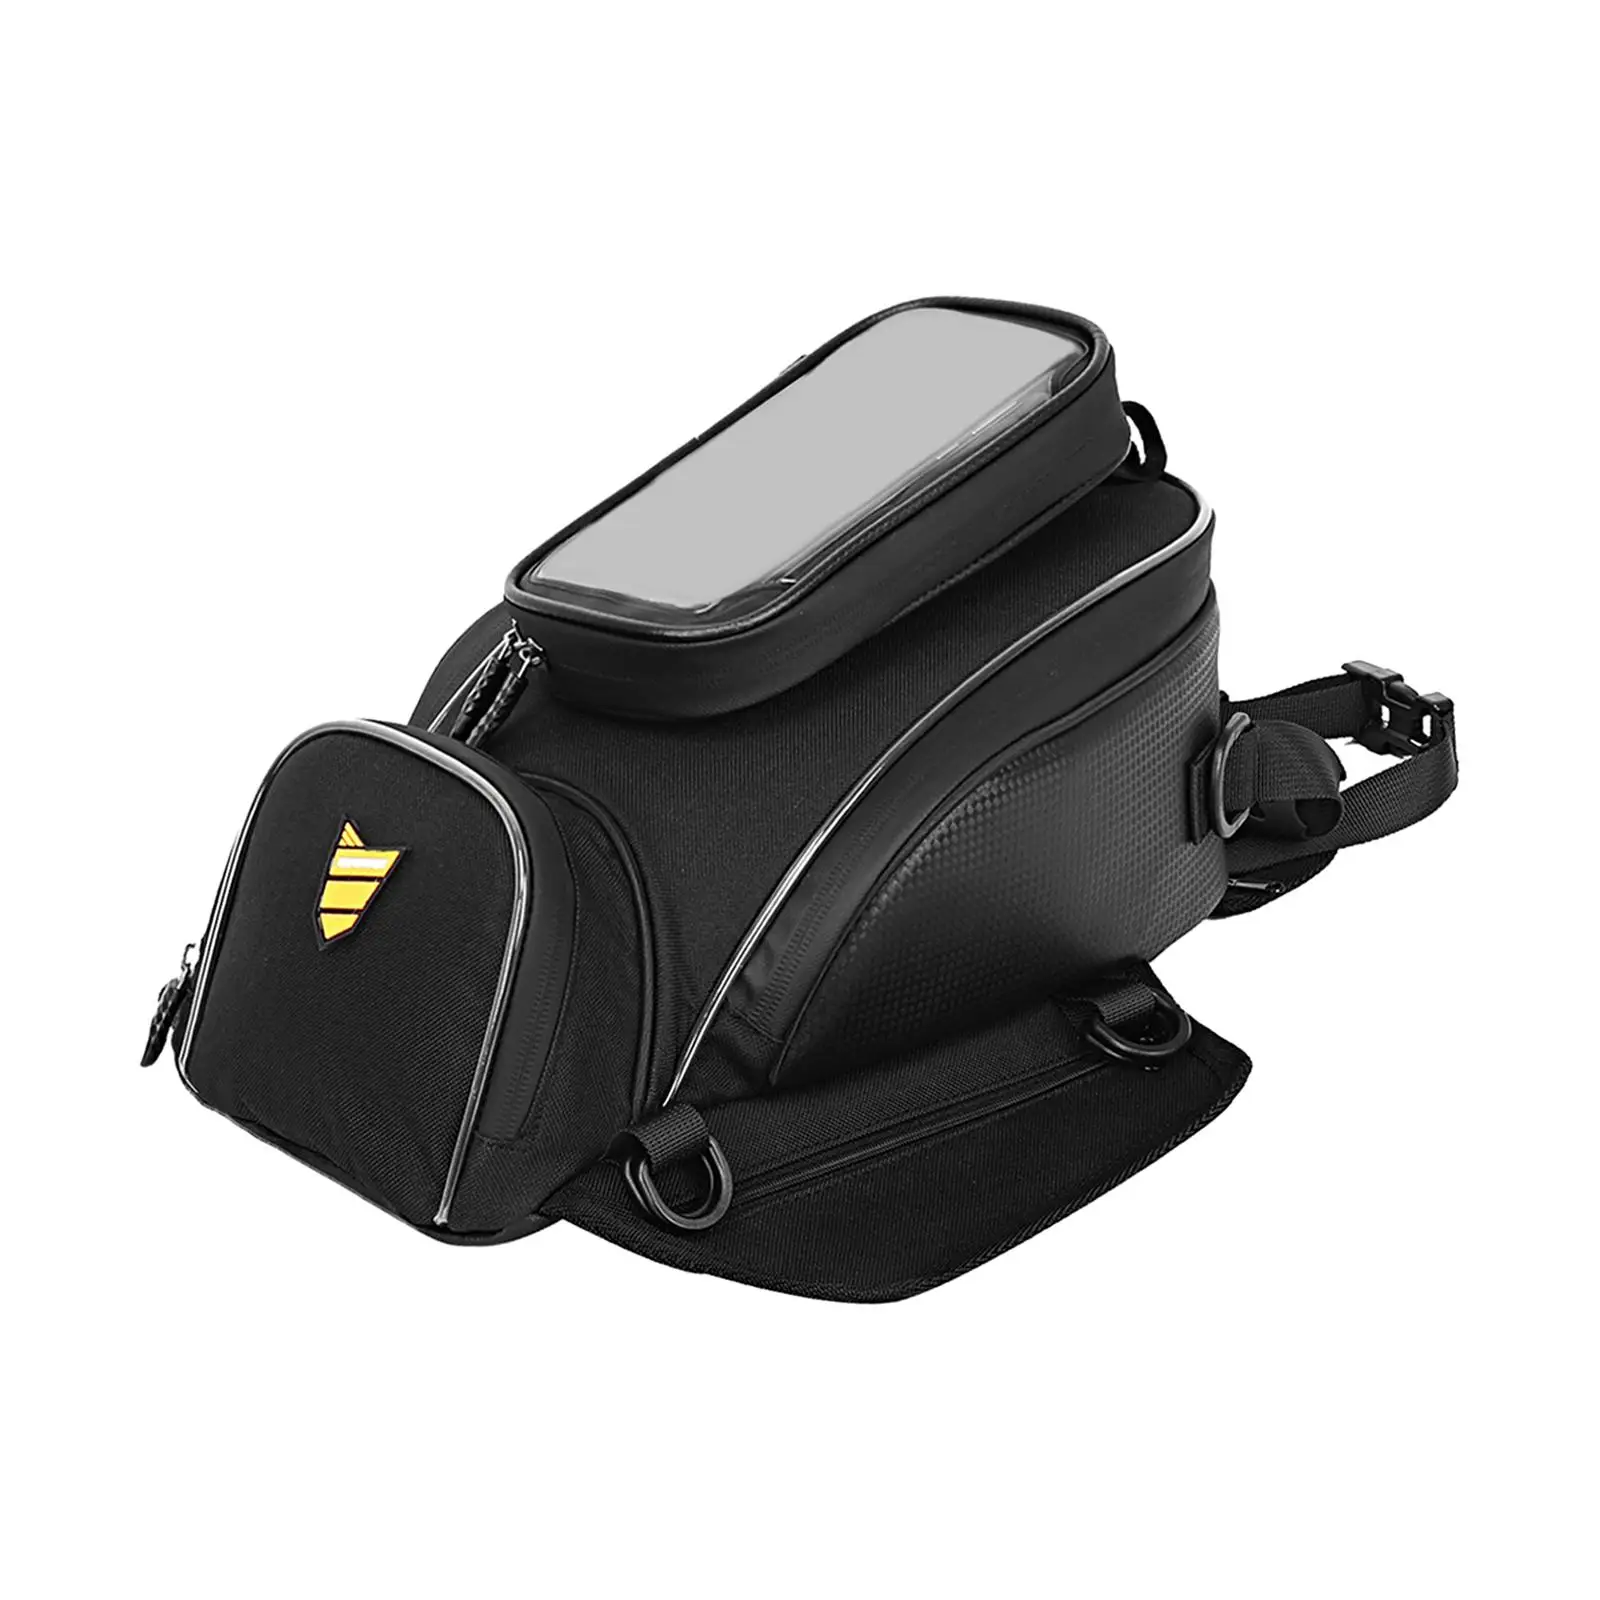 Universal Motorcycle Tank Bag Phone Pocket Touch Screen for Riding Traveling